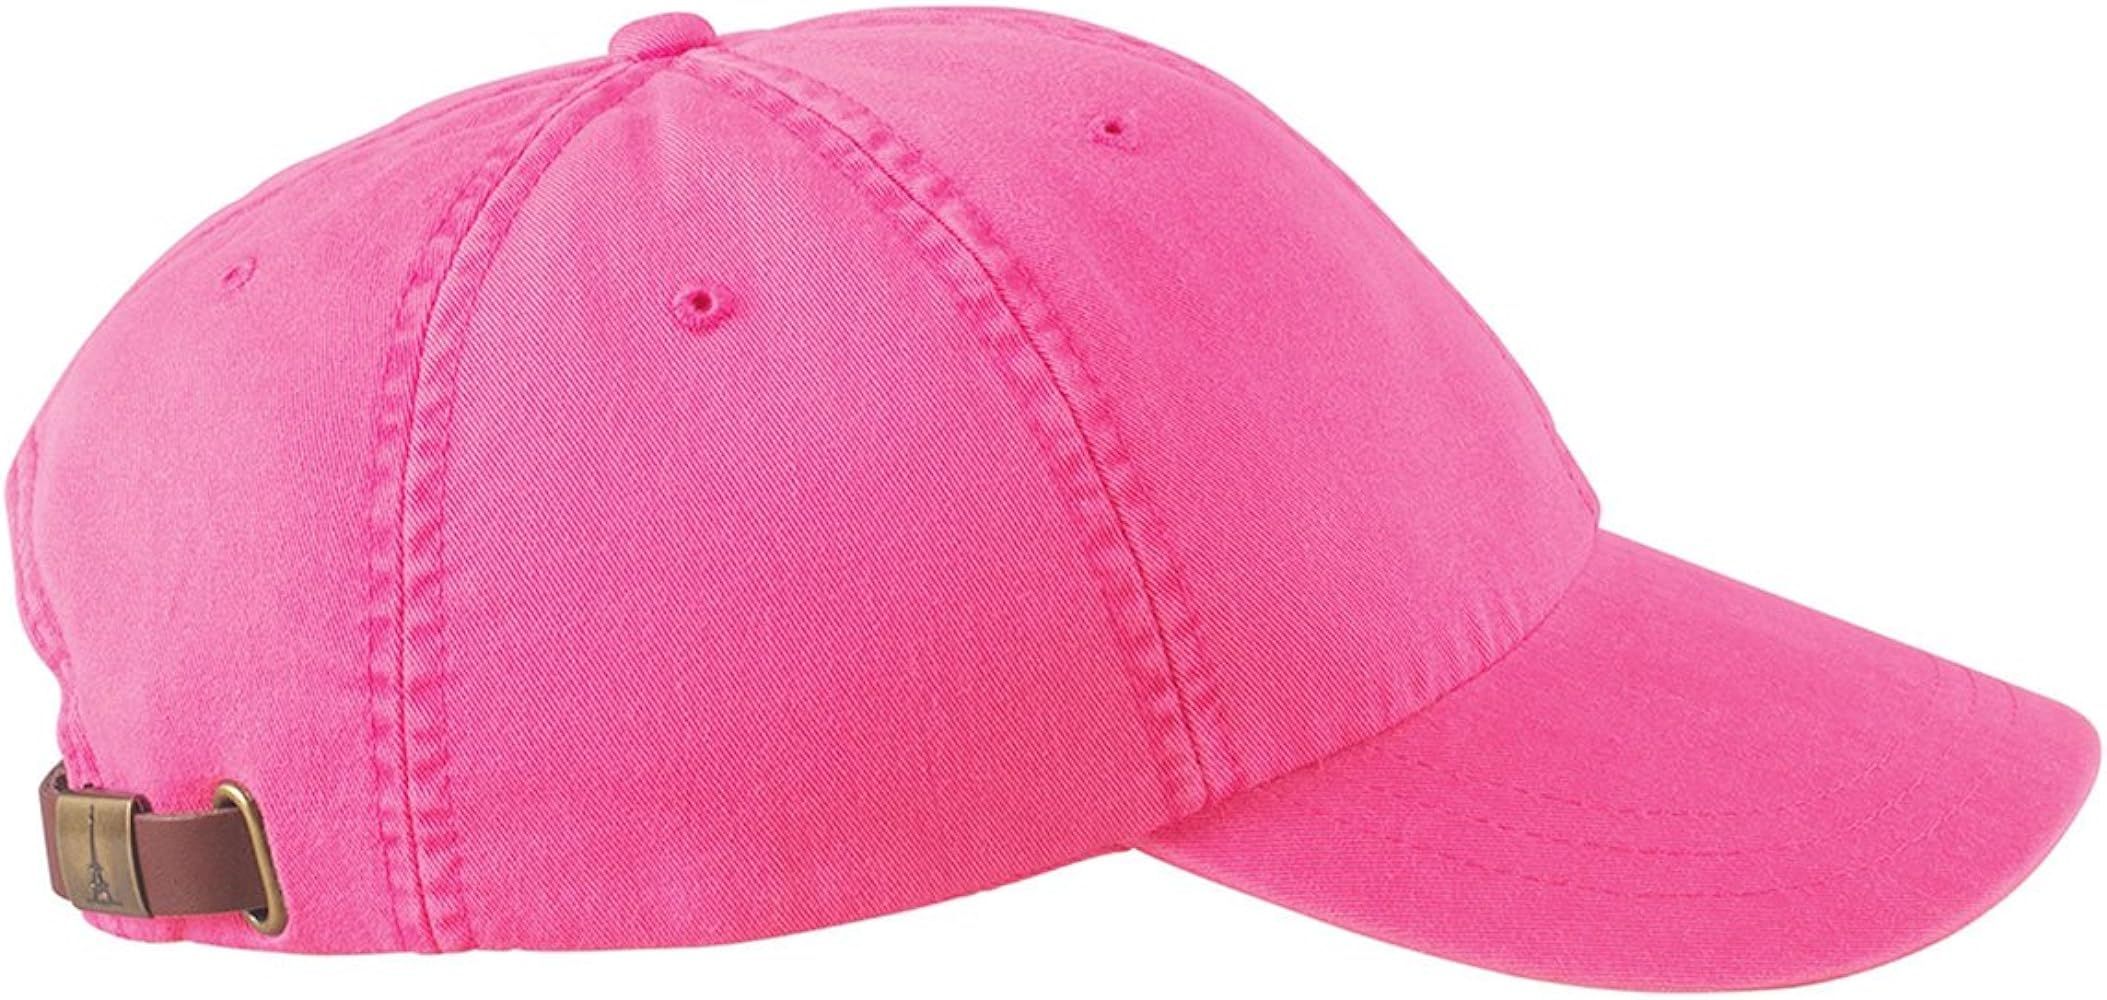 Adams 6-Panel Washed Pigment-Dyed Cap, Hot Pink, OS | Amazon (US)